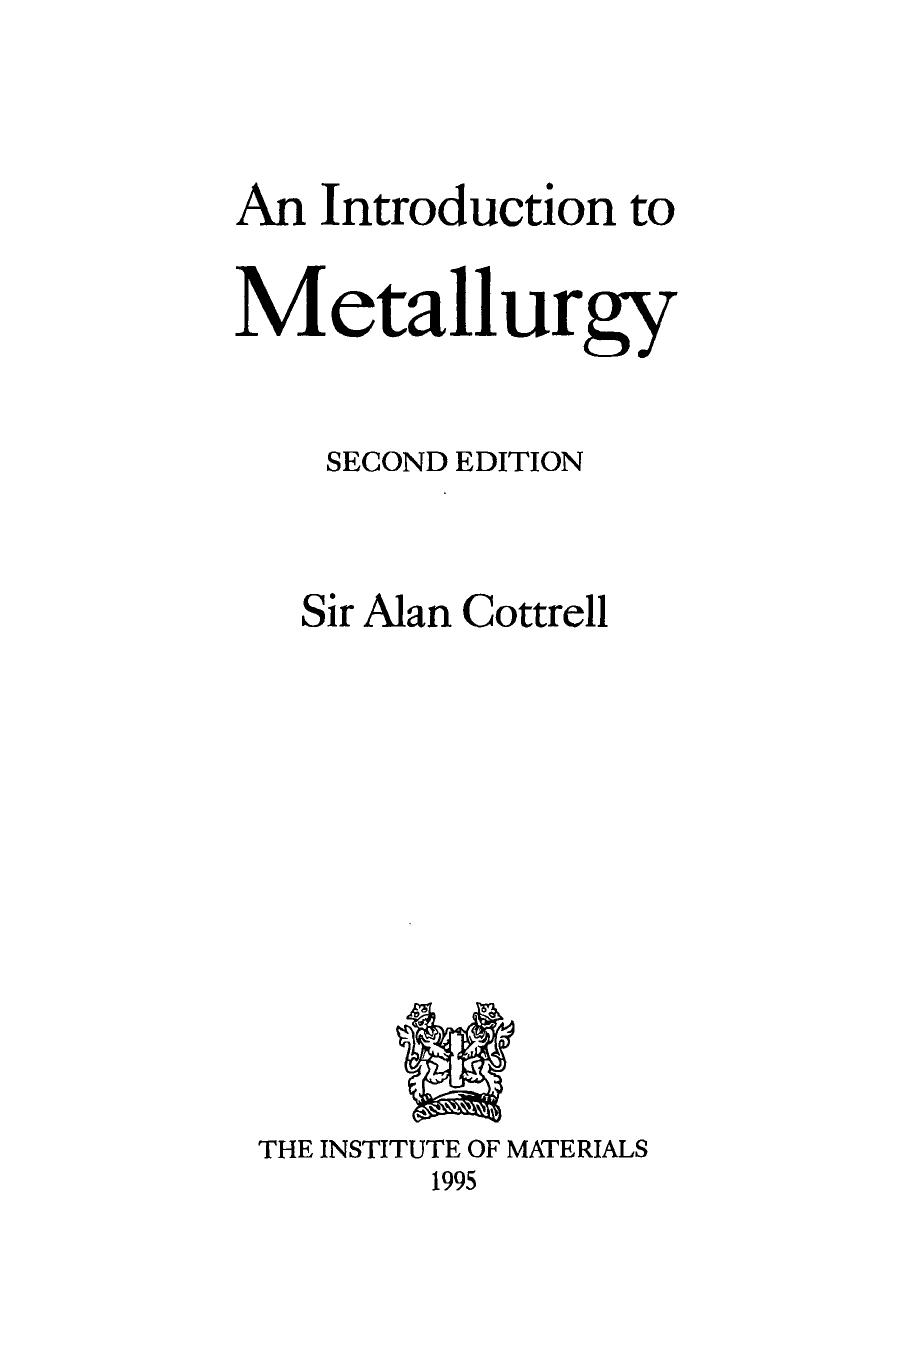 An Introduction to Metallurgy, 1975